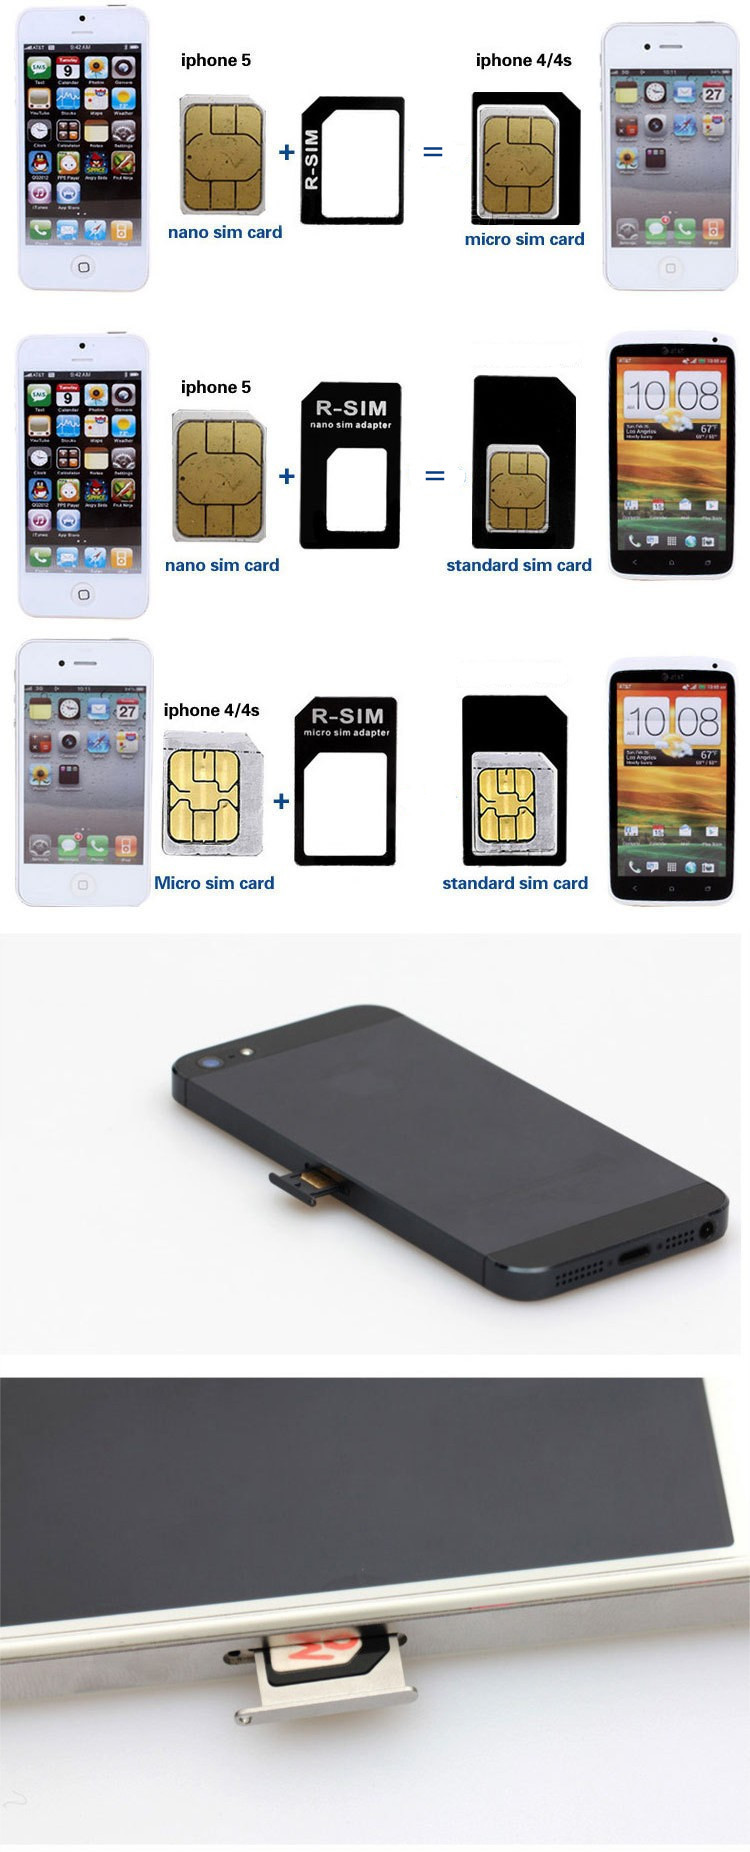 4-in-1-Nano-Micro-Standard-SIM-Card-Adaptor-Adapter-Adaptador-Eject-Pin-for-iPhone-4-4s-5-5s-5c-6-6-Plus-Samsung-Galaxy-S6-S5-S4 (2)